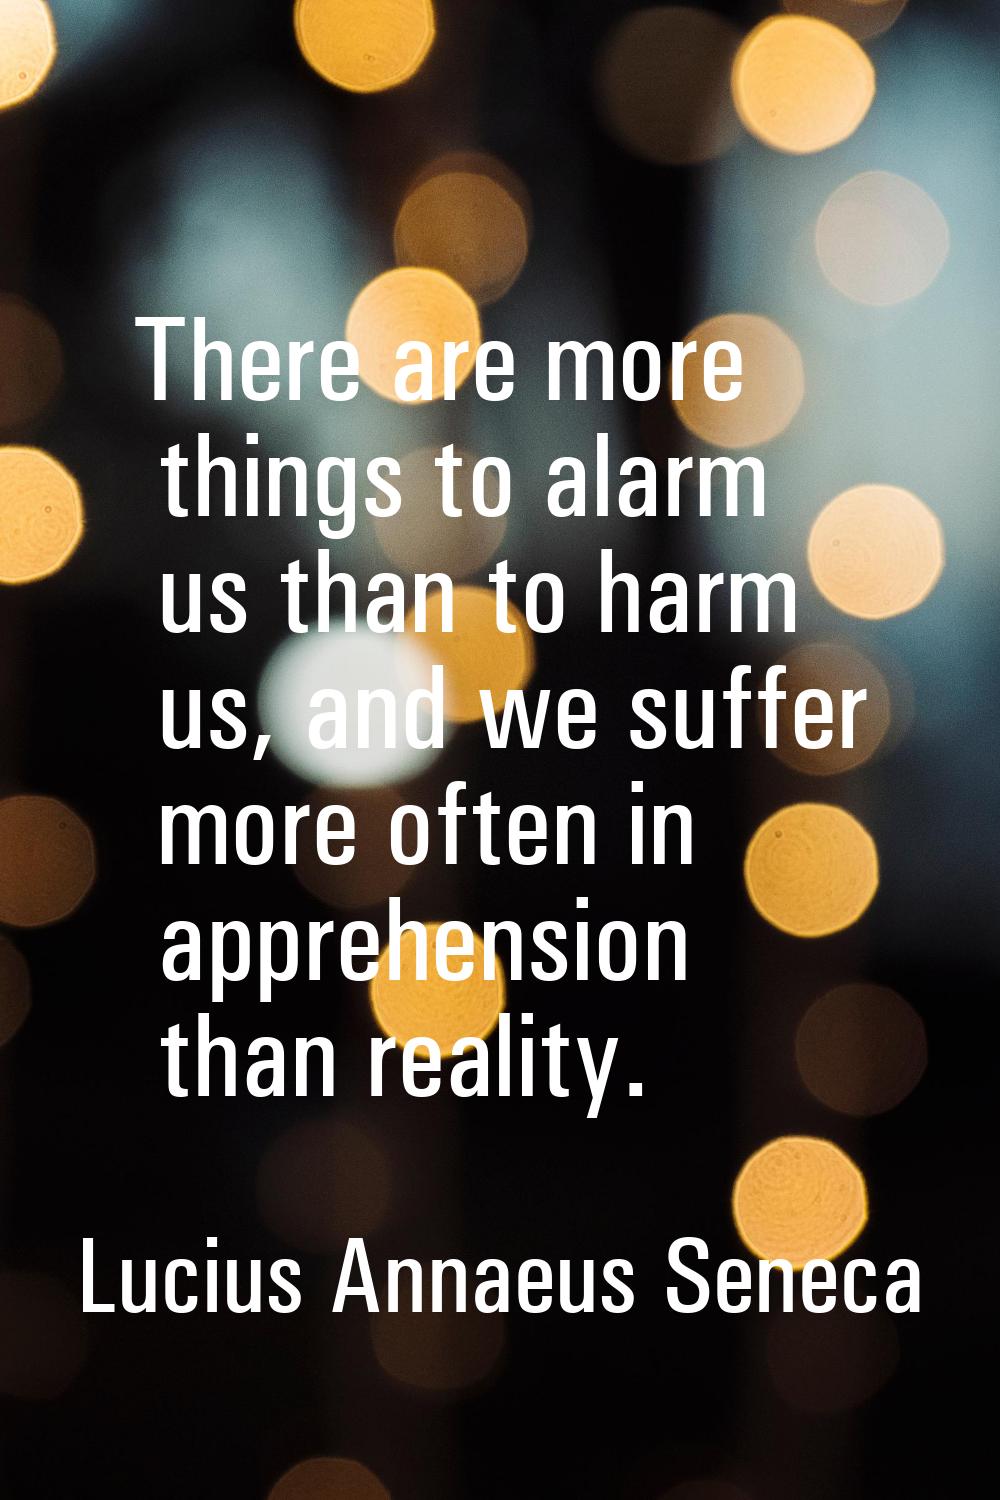 There are more things to alarm us than to harm us, and we suffer more often in apprehension than re